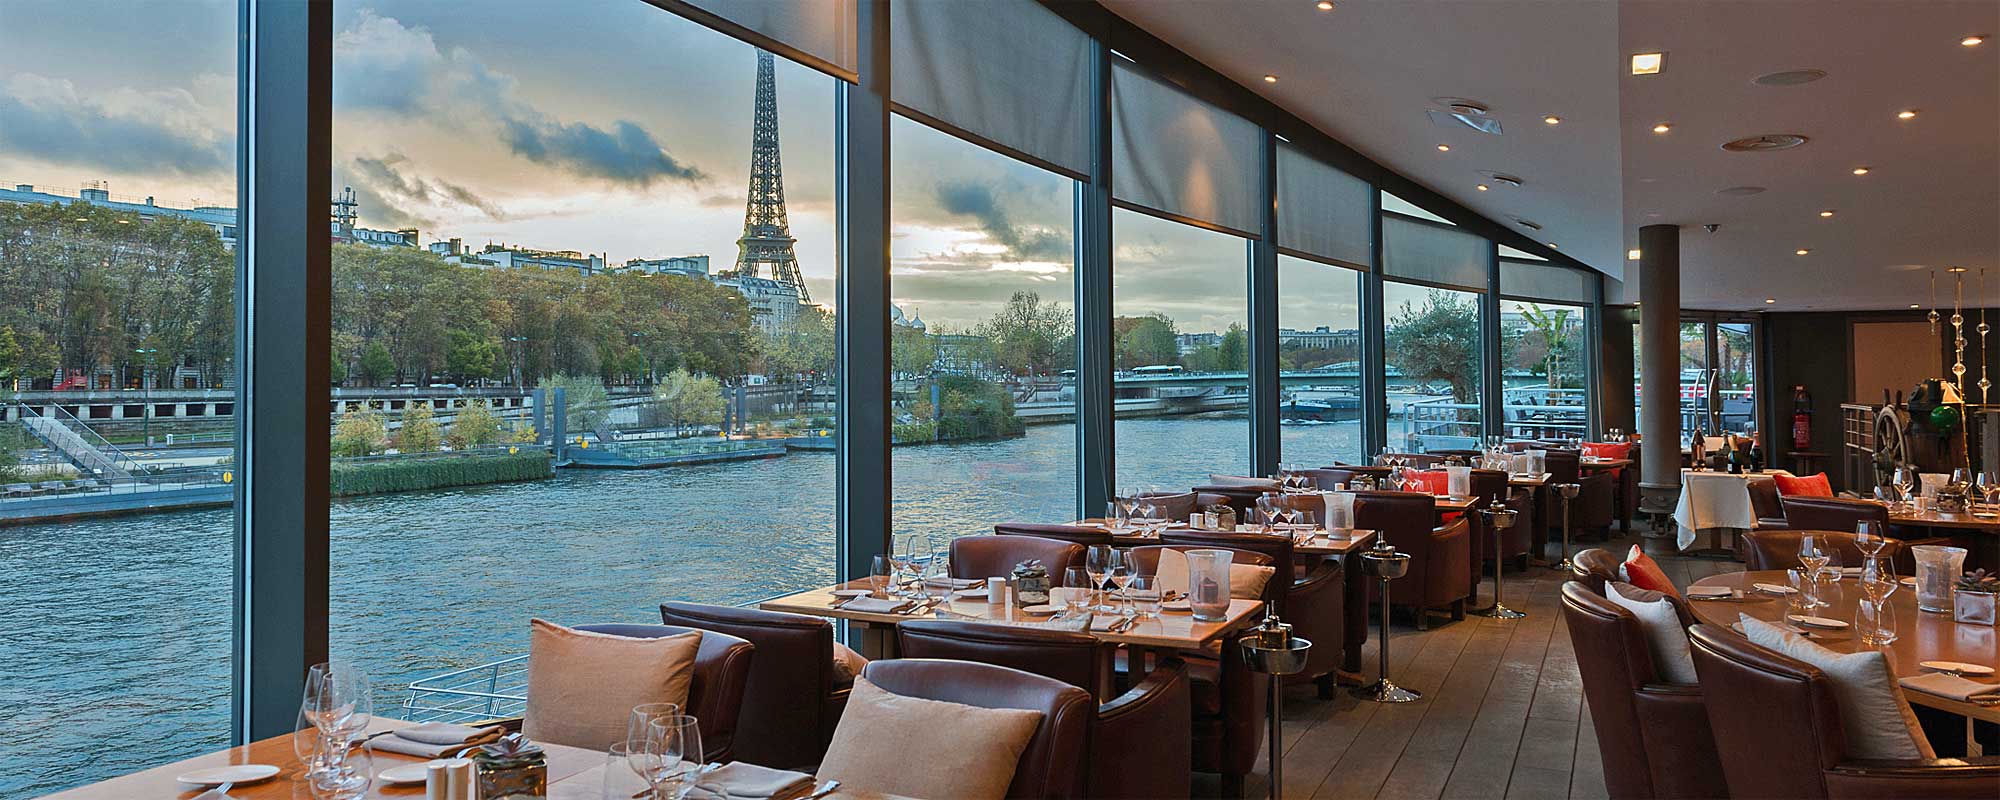 Restaurant with a view